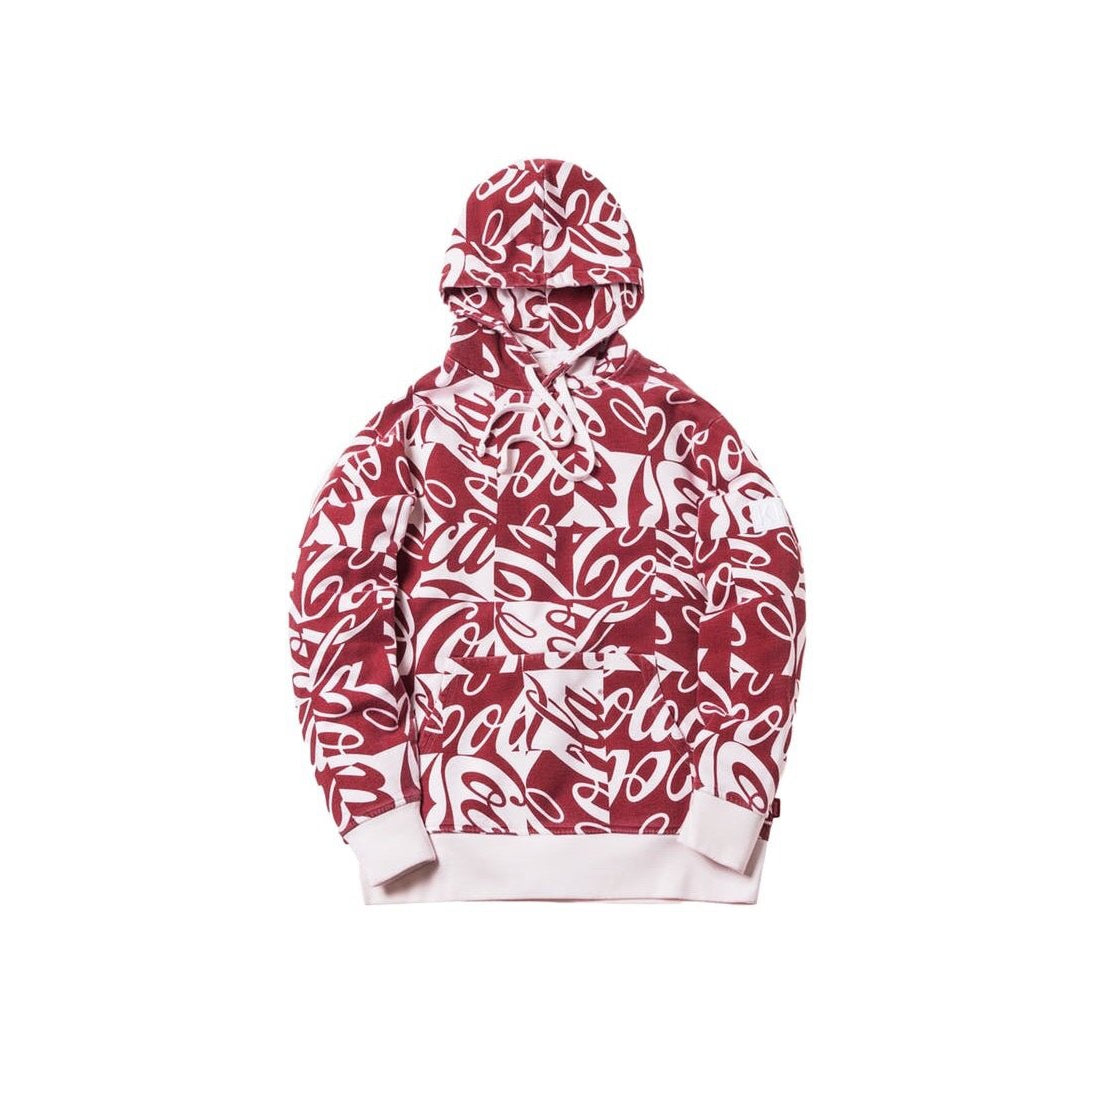 Kith x Coca-Cola Cubed Global "Red" - Centrall Online